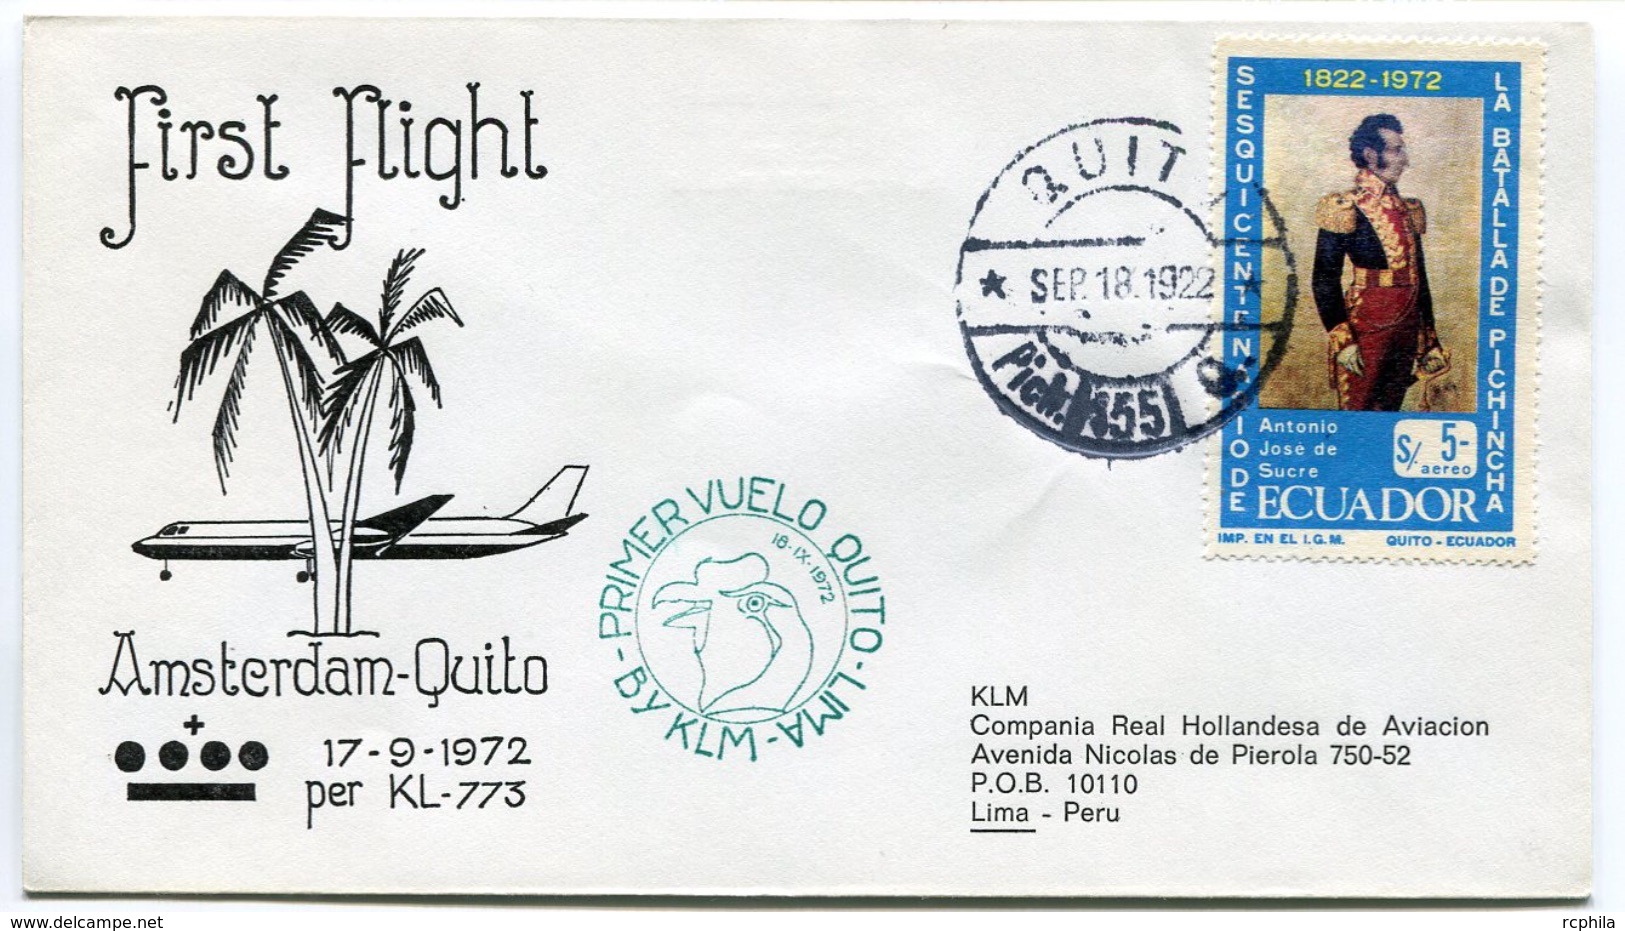 RC 6703 PAYS-BAS KLM 1972 1er VOL AMSTERDAM - QUITO EQUATEUR FFC NETHERLANDS LETTRE COVER - Luftpost